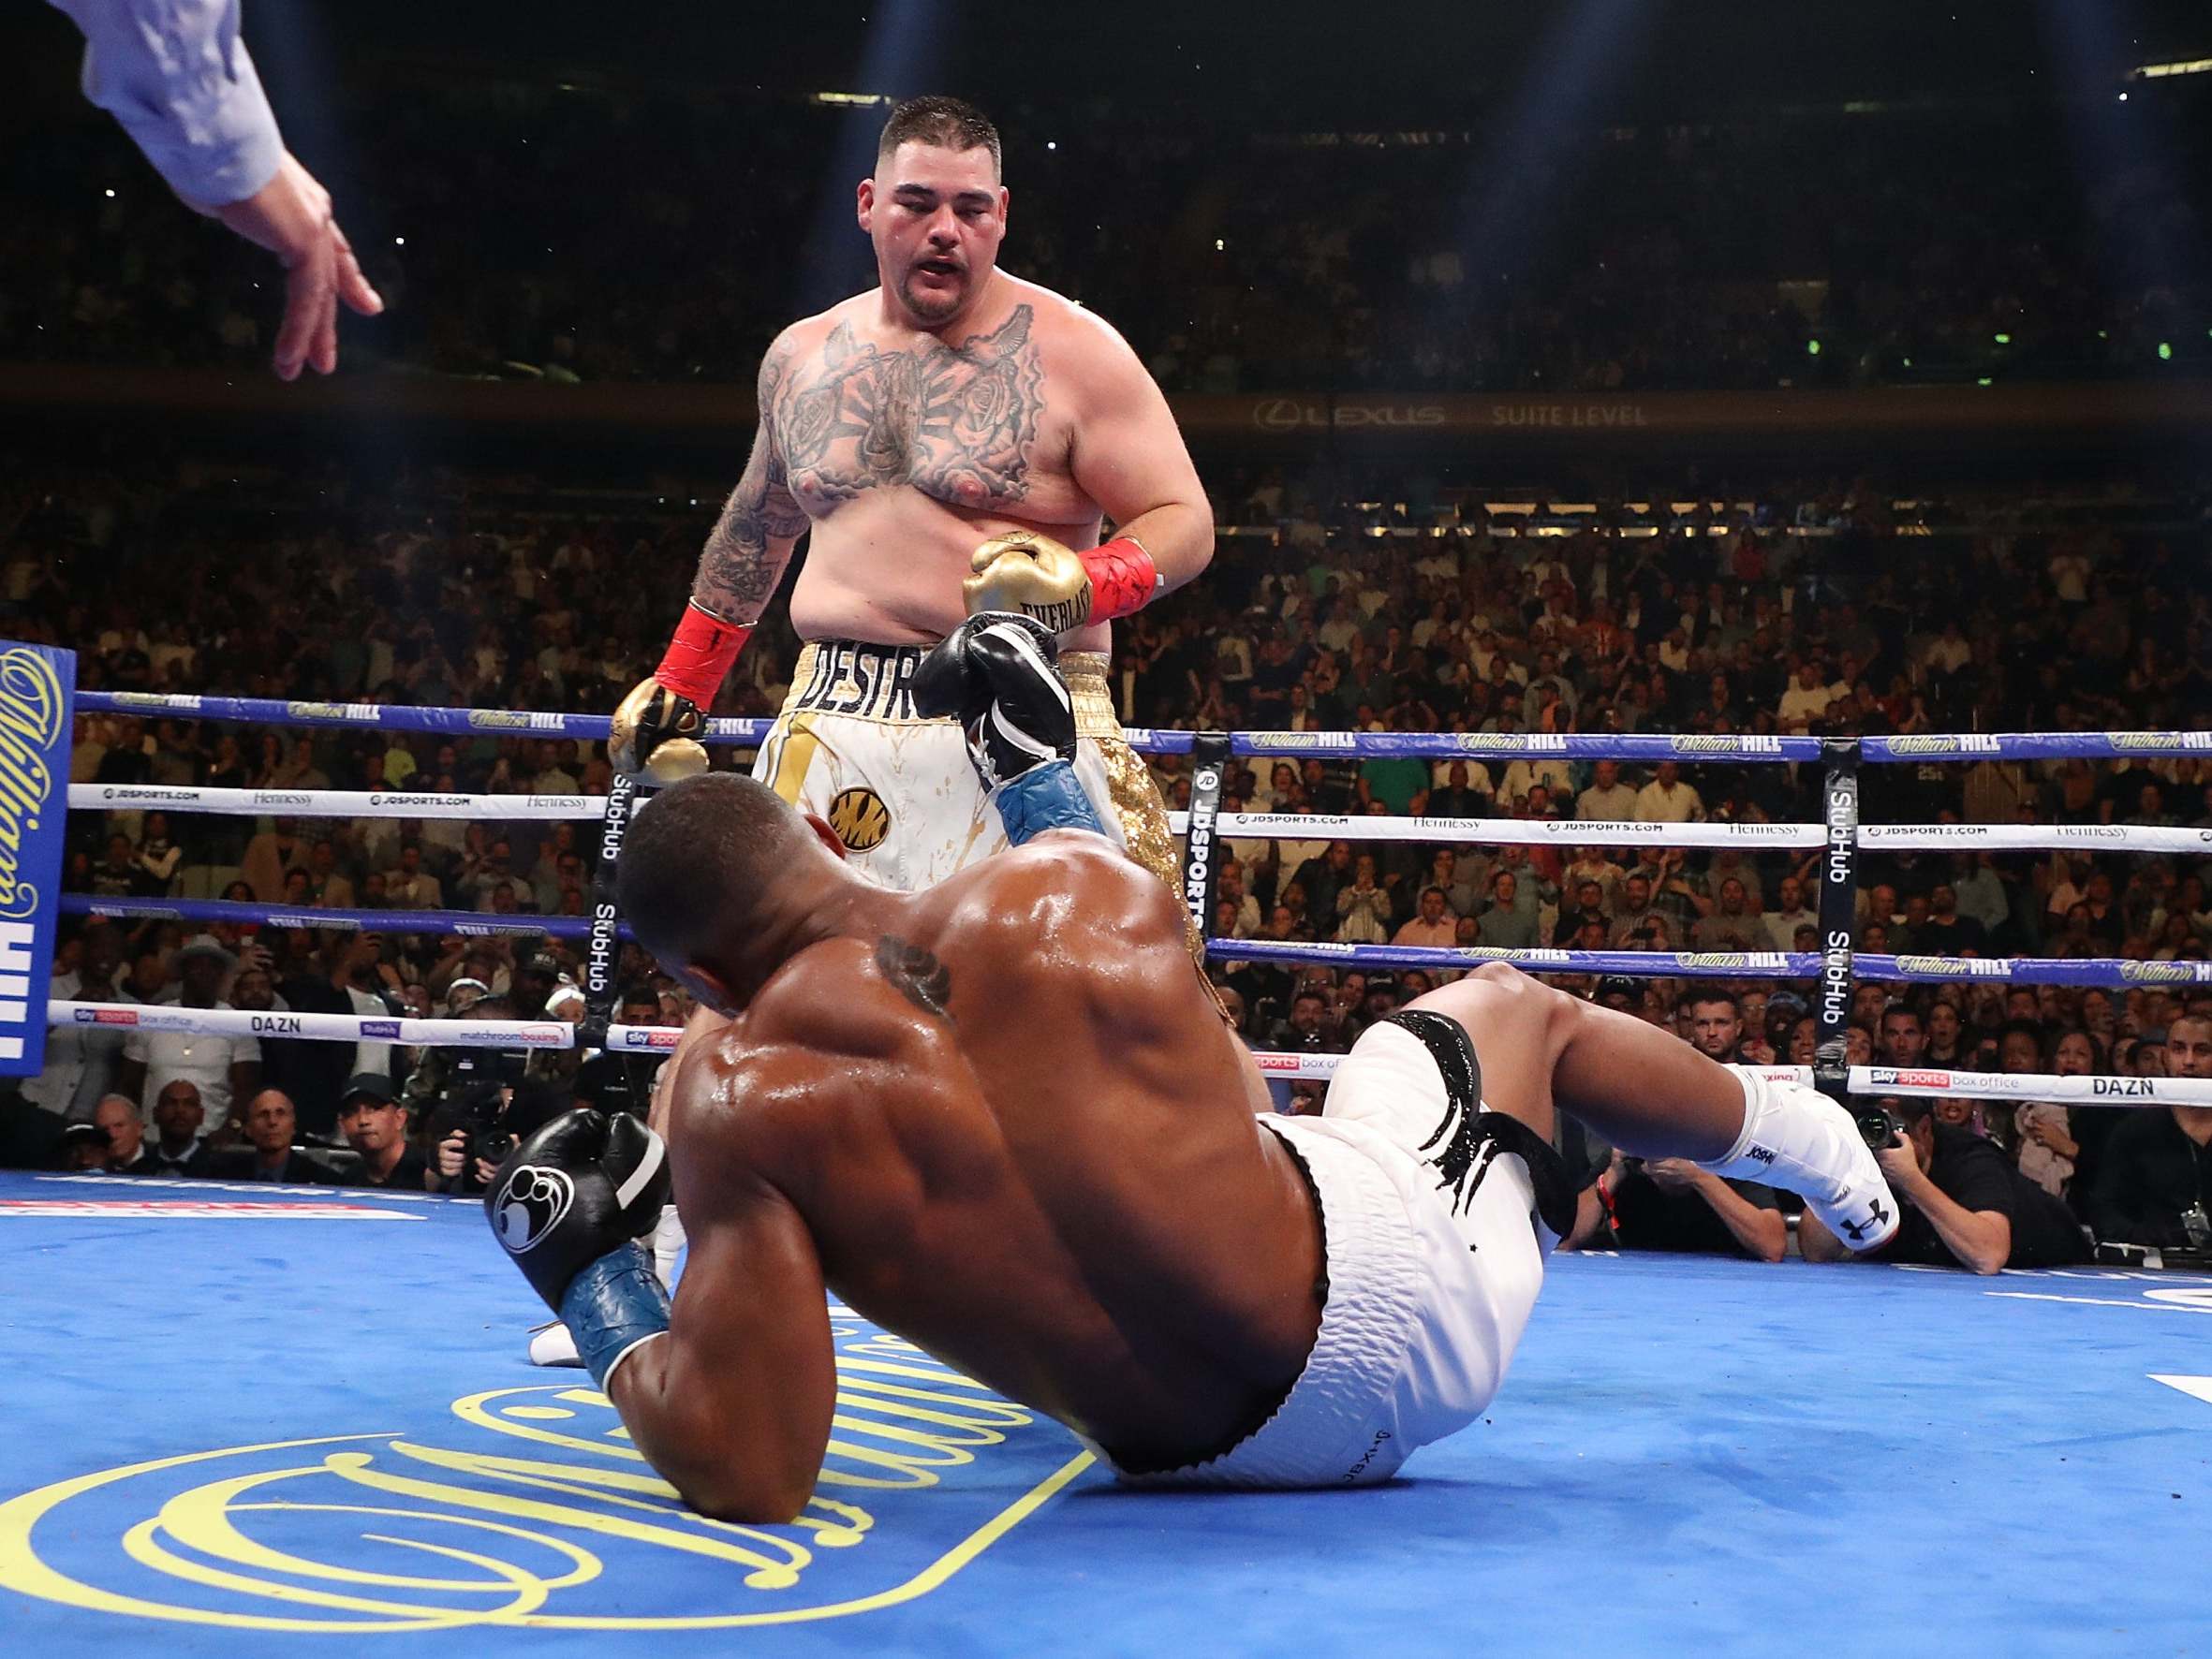 Anthony Joshua vs Andy Ruiz result Underdog stuns Joshua with knockout victory to win world titles The Independent The Independent